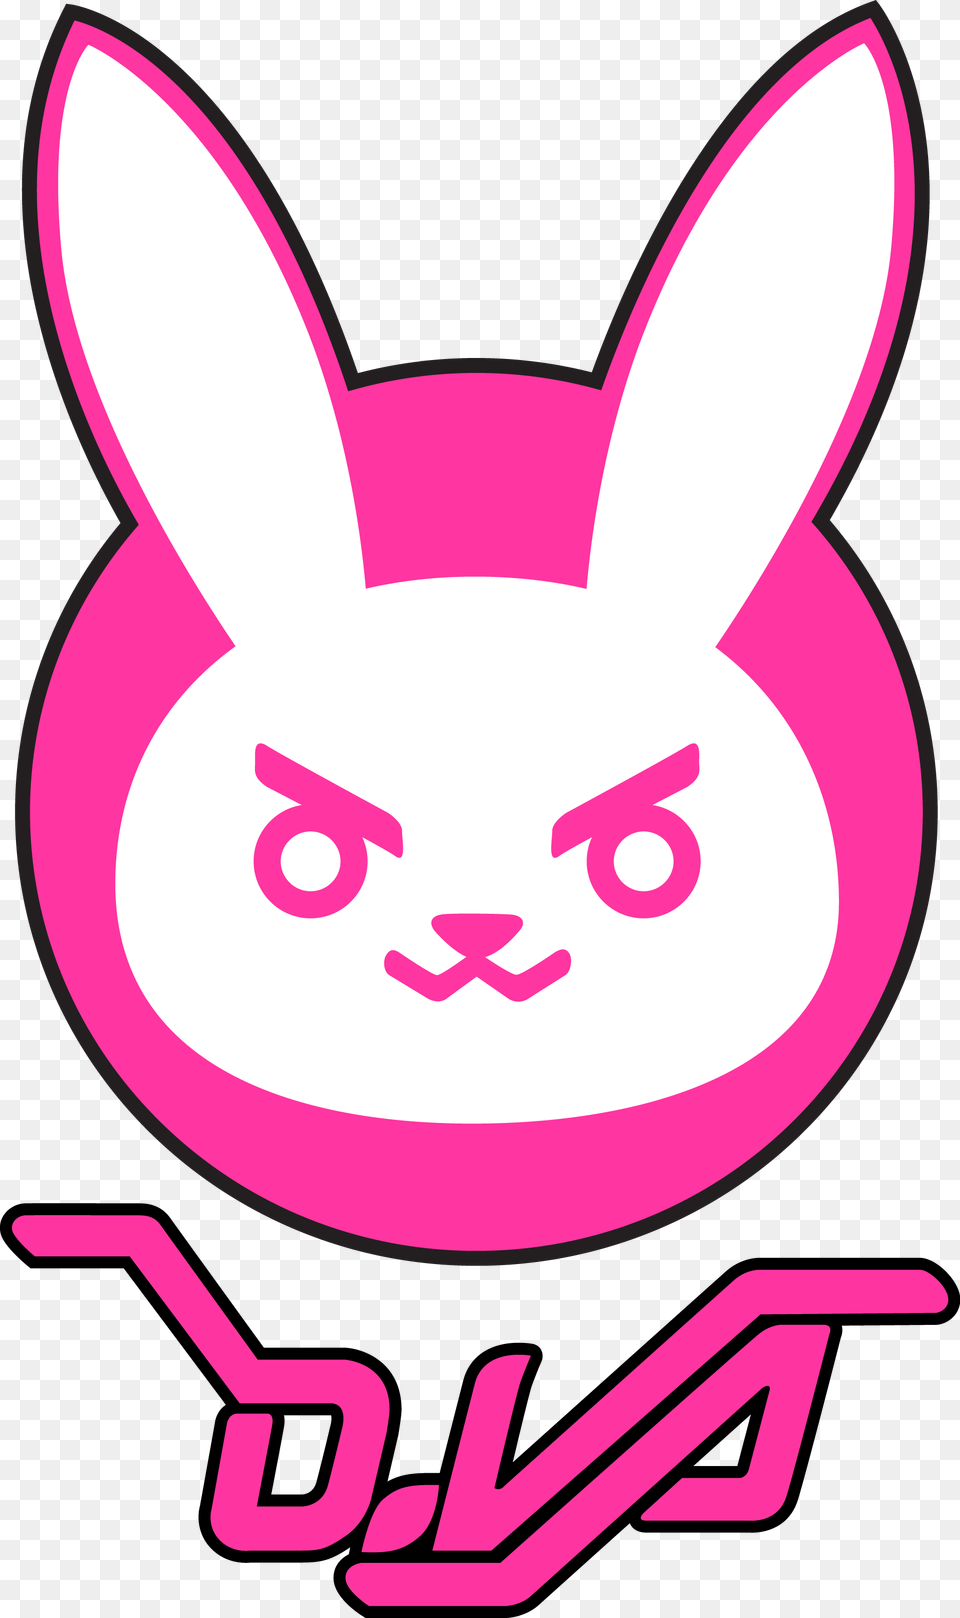 Result For D D Va Bunny Logo, Sticker, Device, Grass, Lawn Png